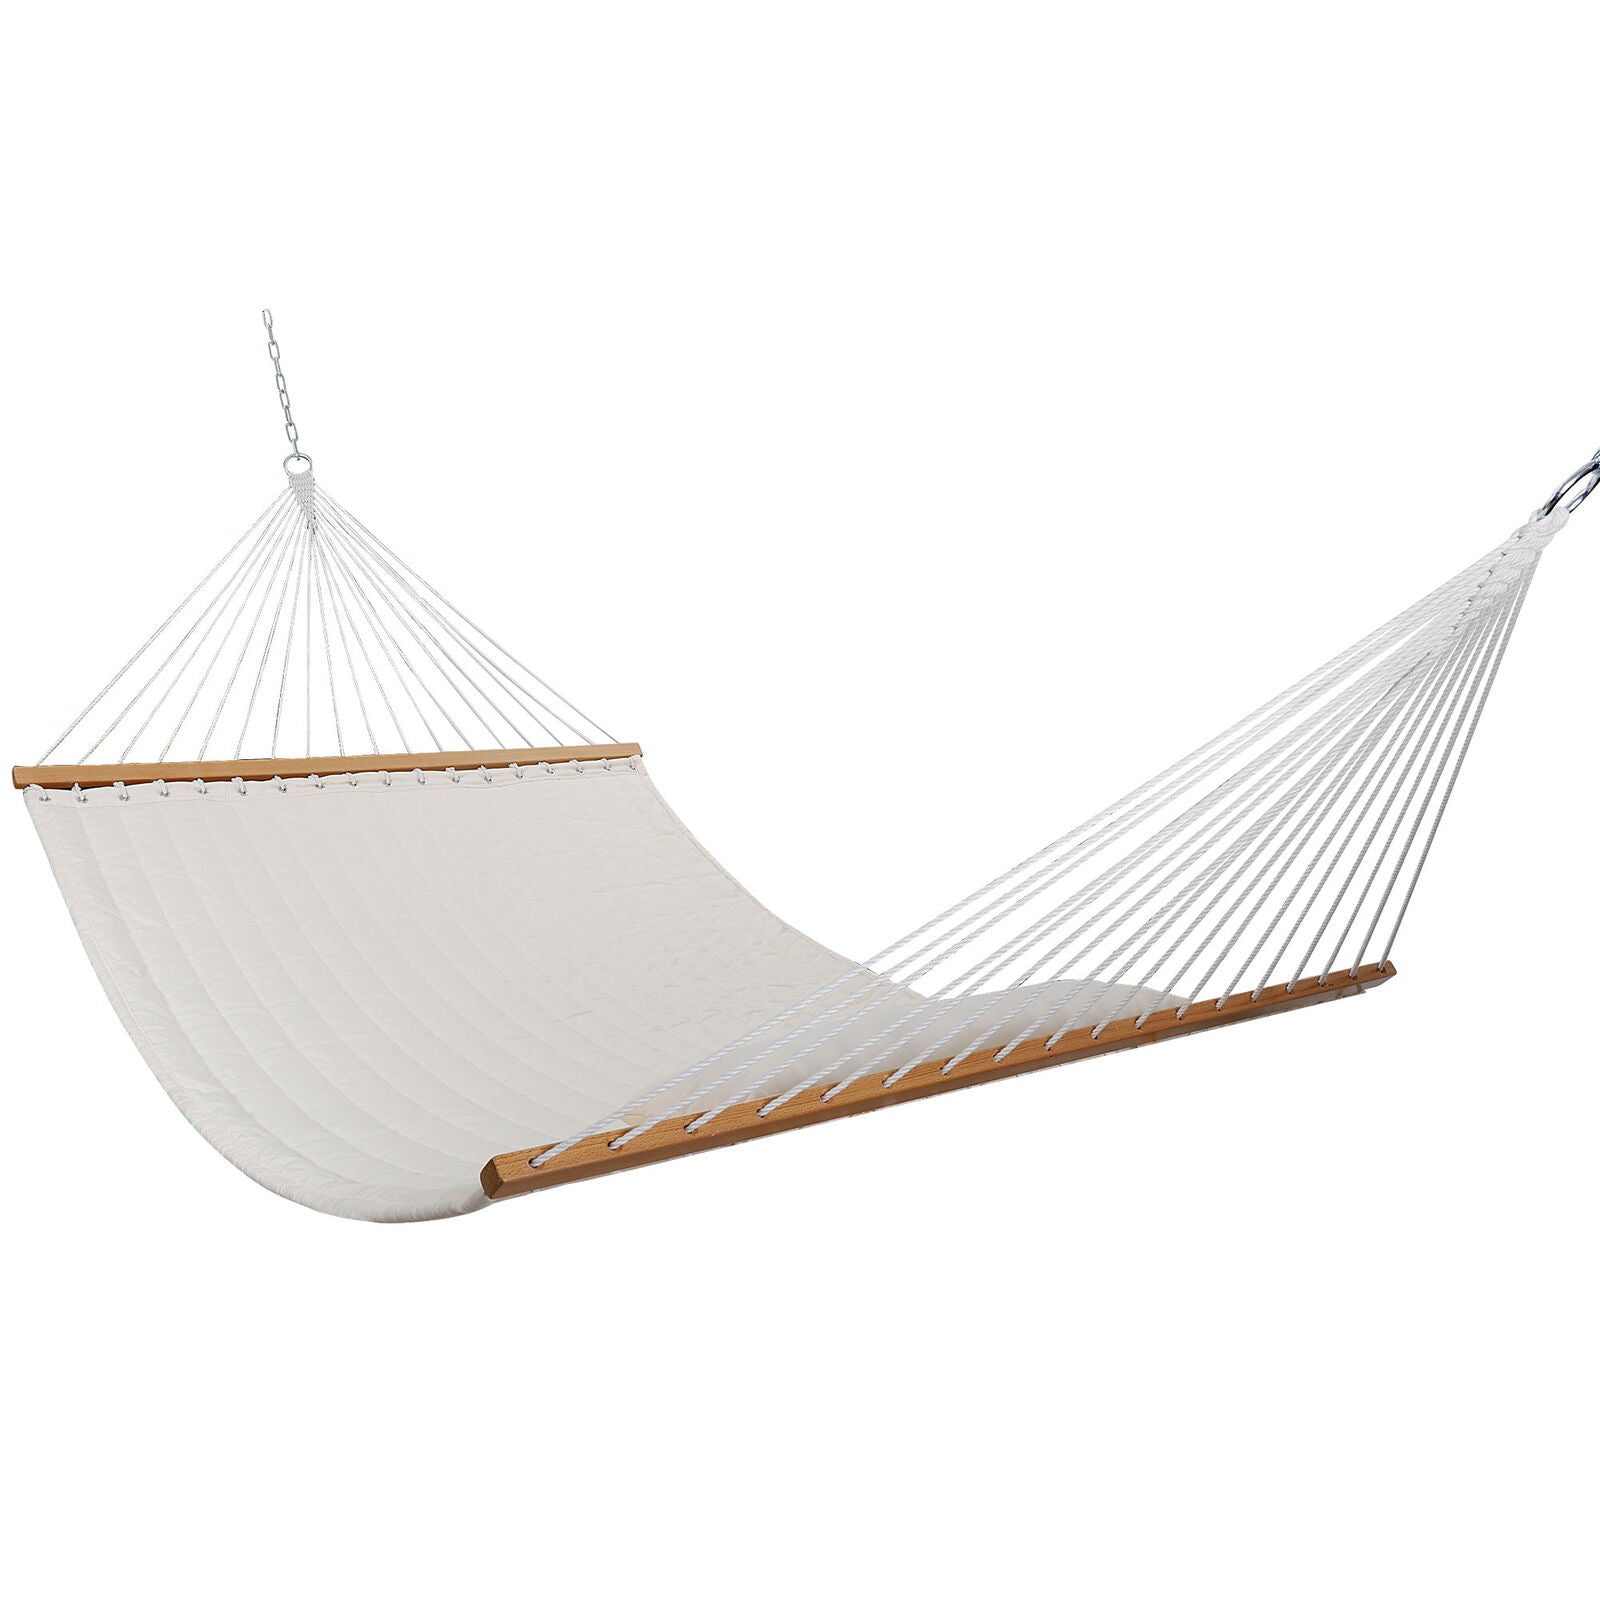 55' Hammocks Double Quilted Fabric Swing with Pillow hammocks Natural